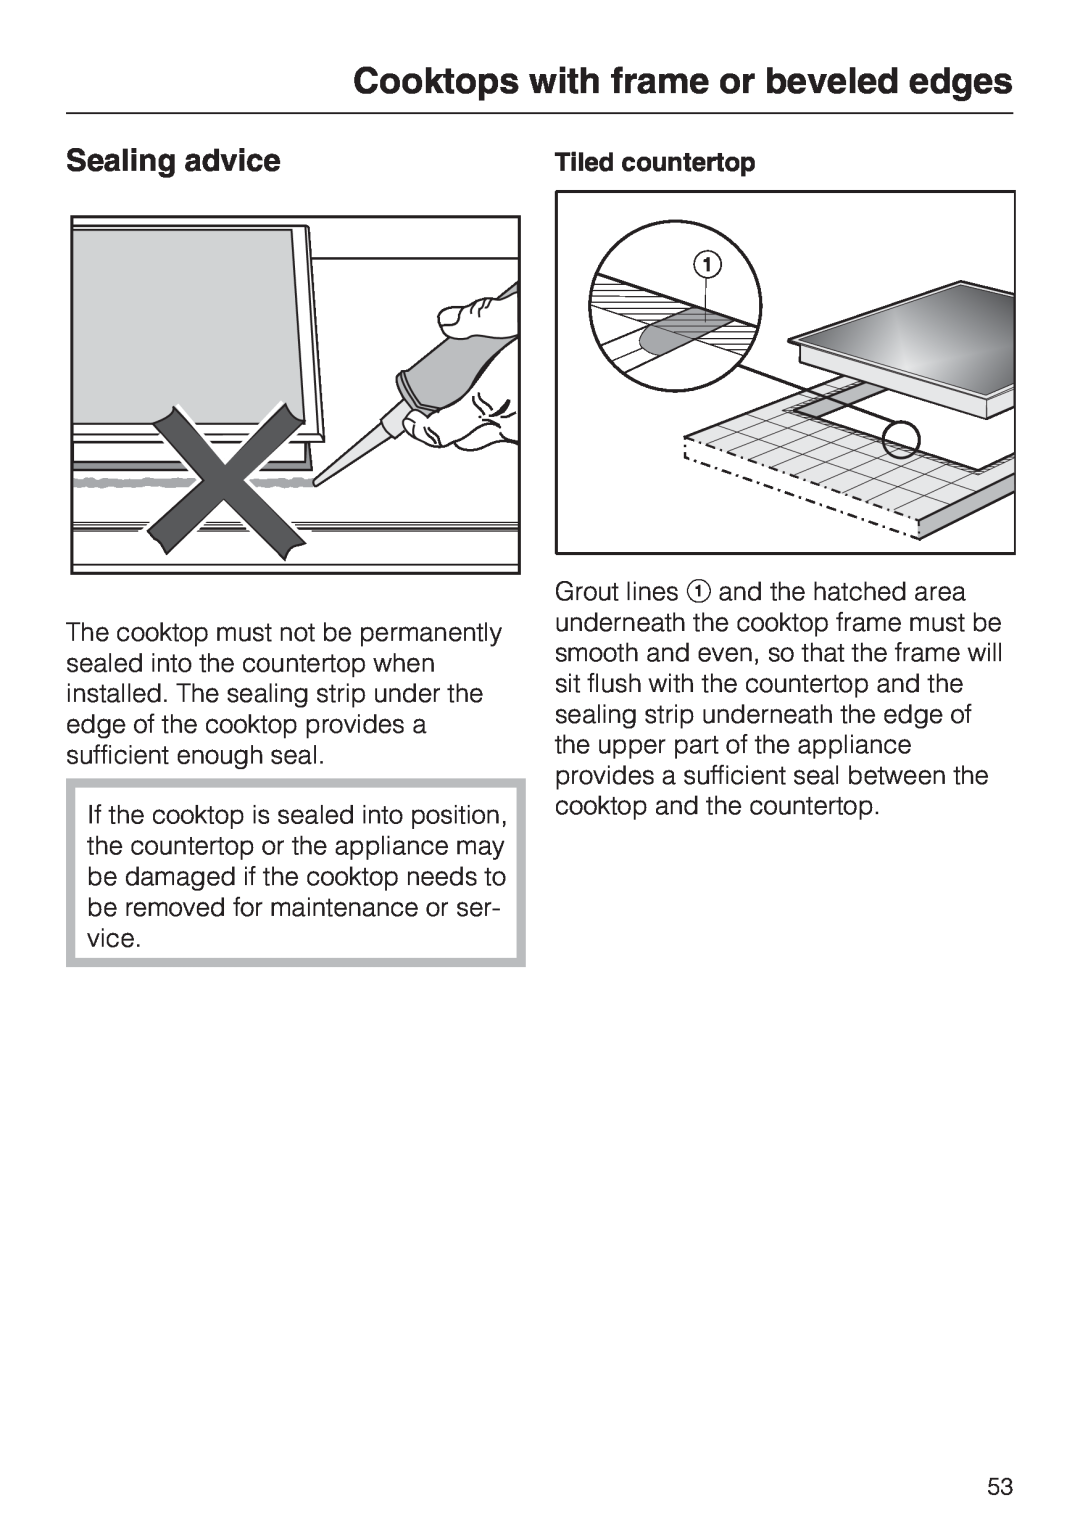 Miele KM 5987, KM 5993 installation instructions Sealing advice, Tiled countertop, Cooktops with frame or beveled edges 